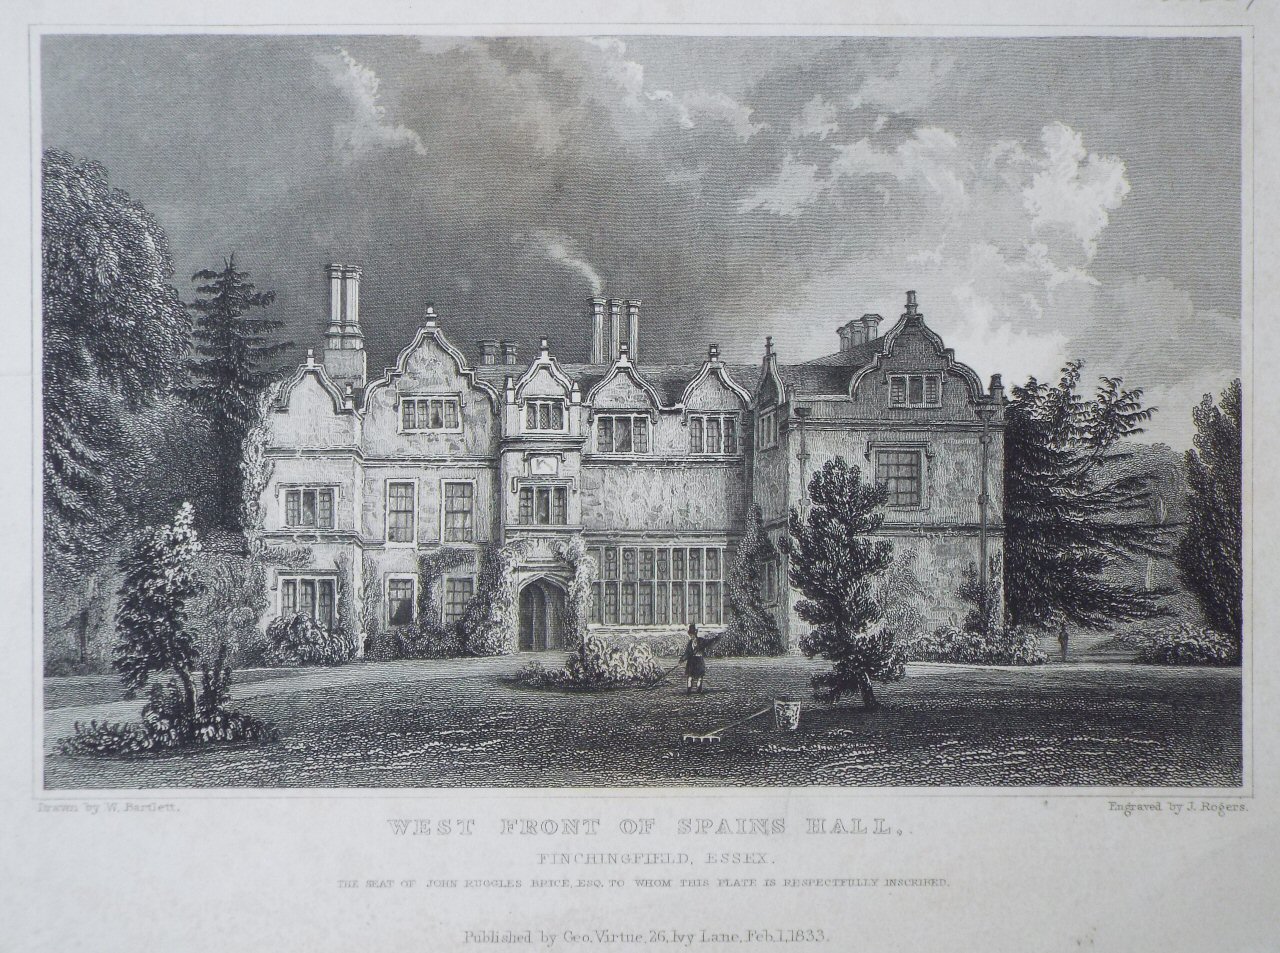 Print - West Front of Spains Hall, Finchingfield, Essex. The Seat of John Ruggles Esq. to whom this plate is respectfully inscribed. - Rogers